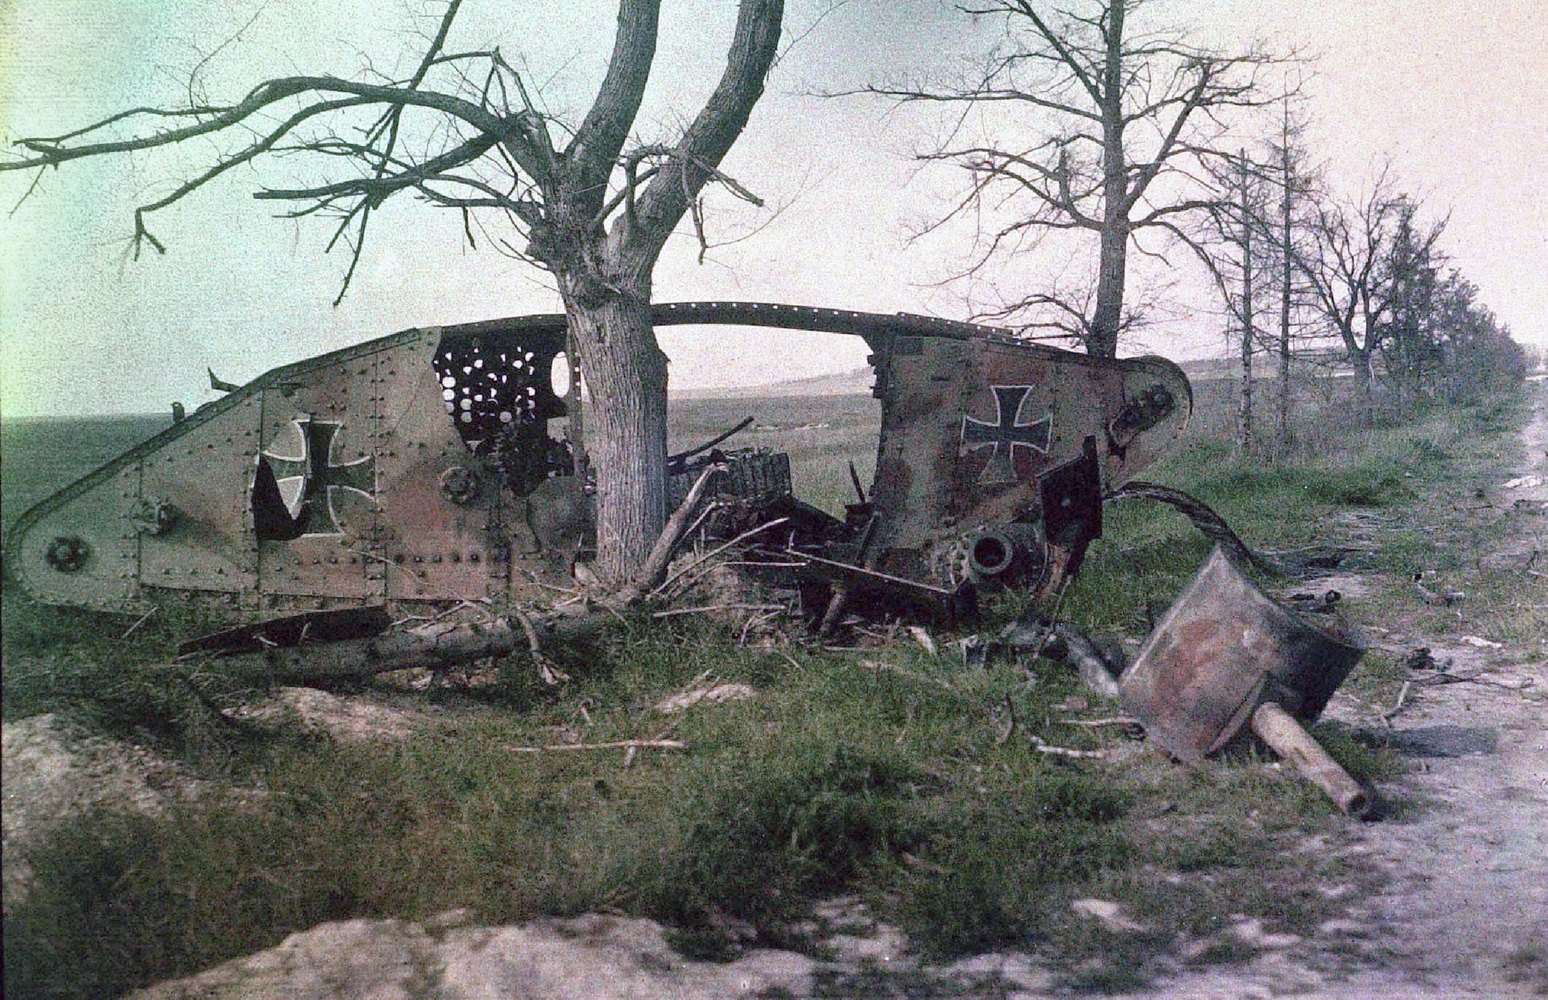 The wreck of a German tank, which was destroyed during a battle on the Western Front.